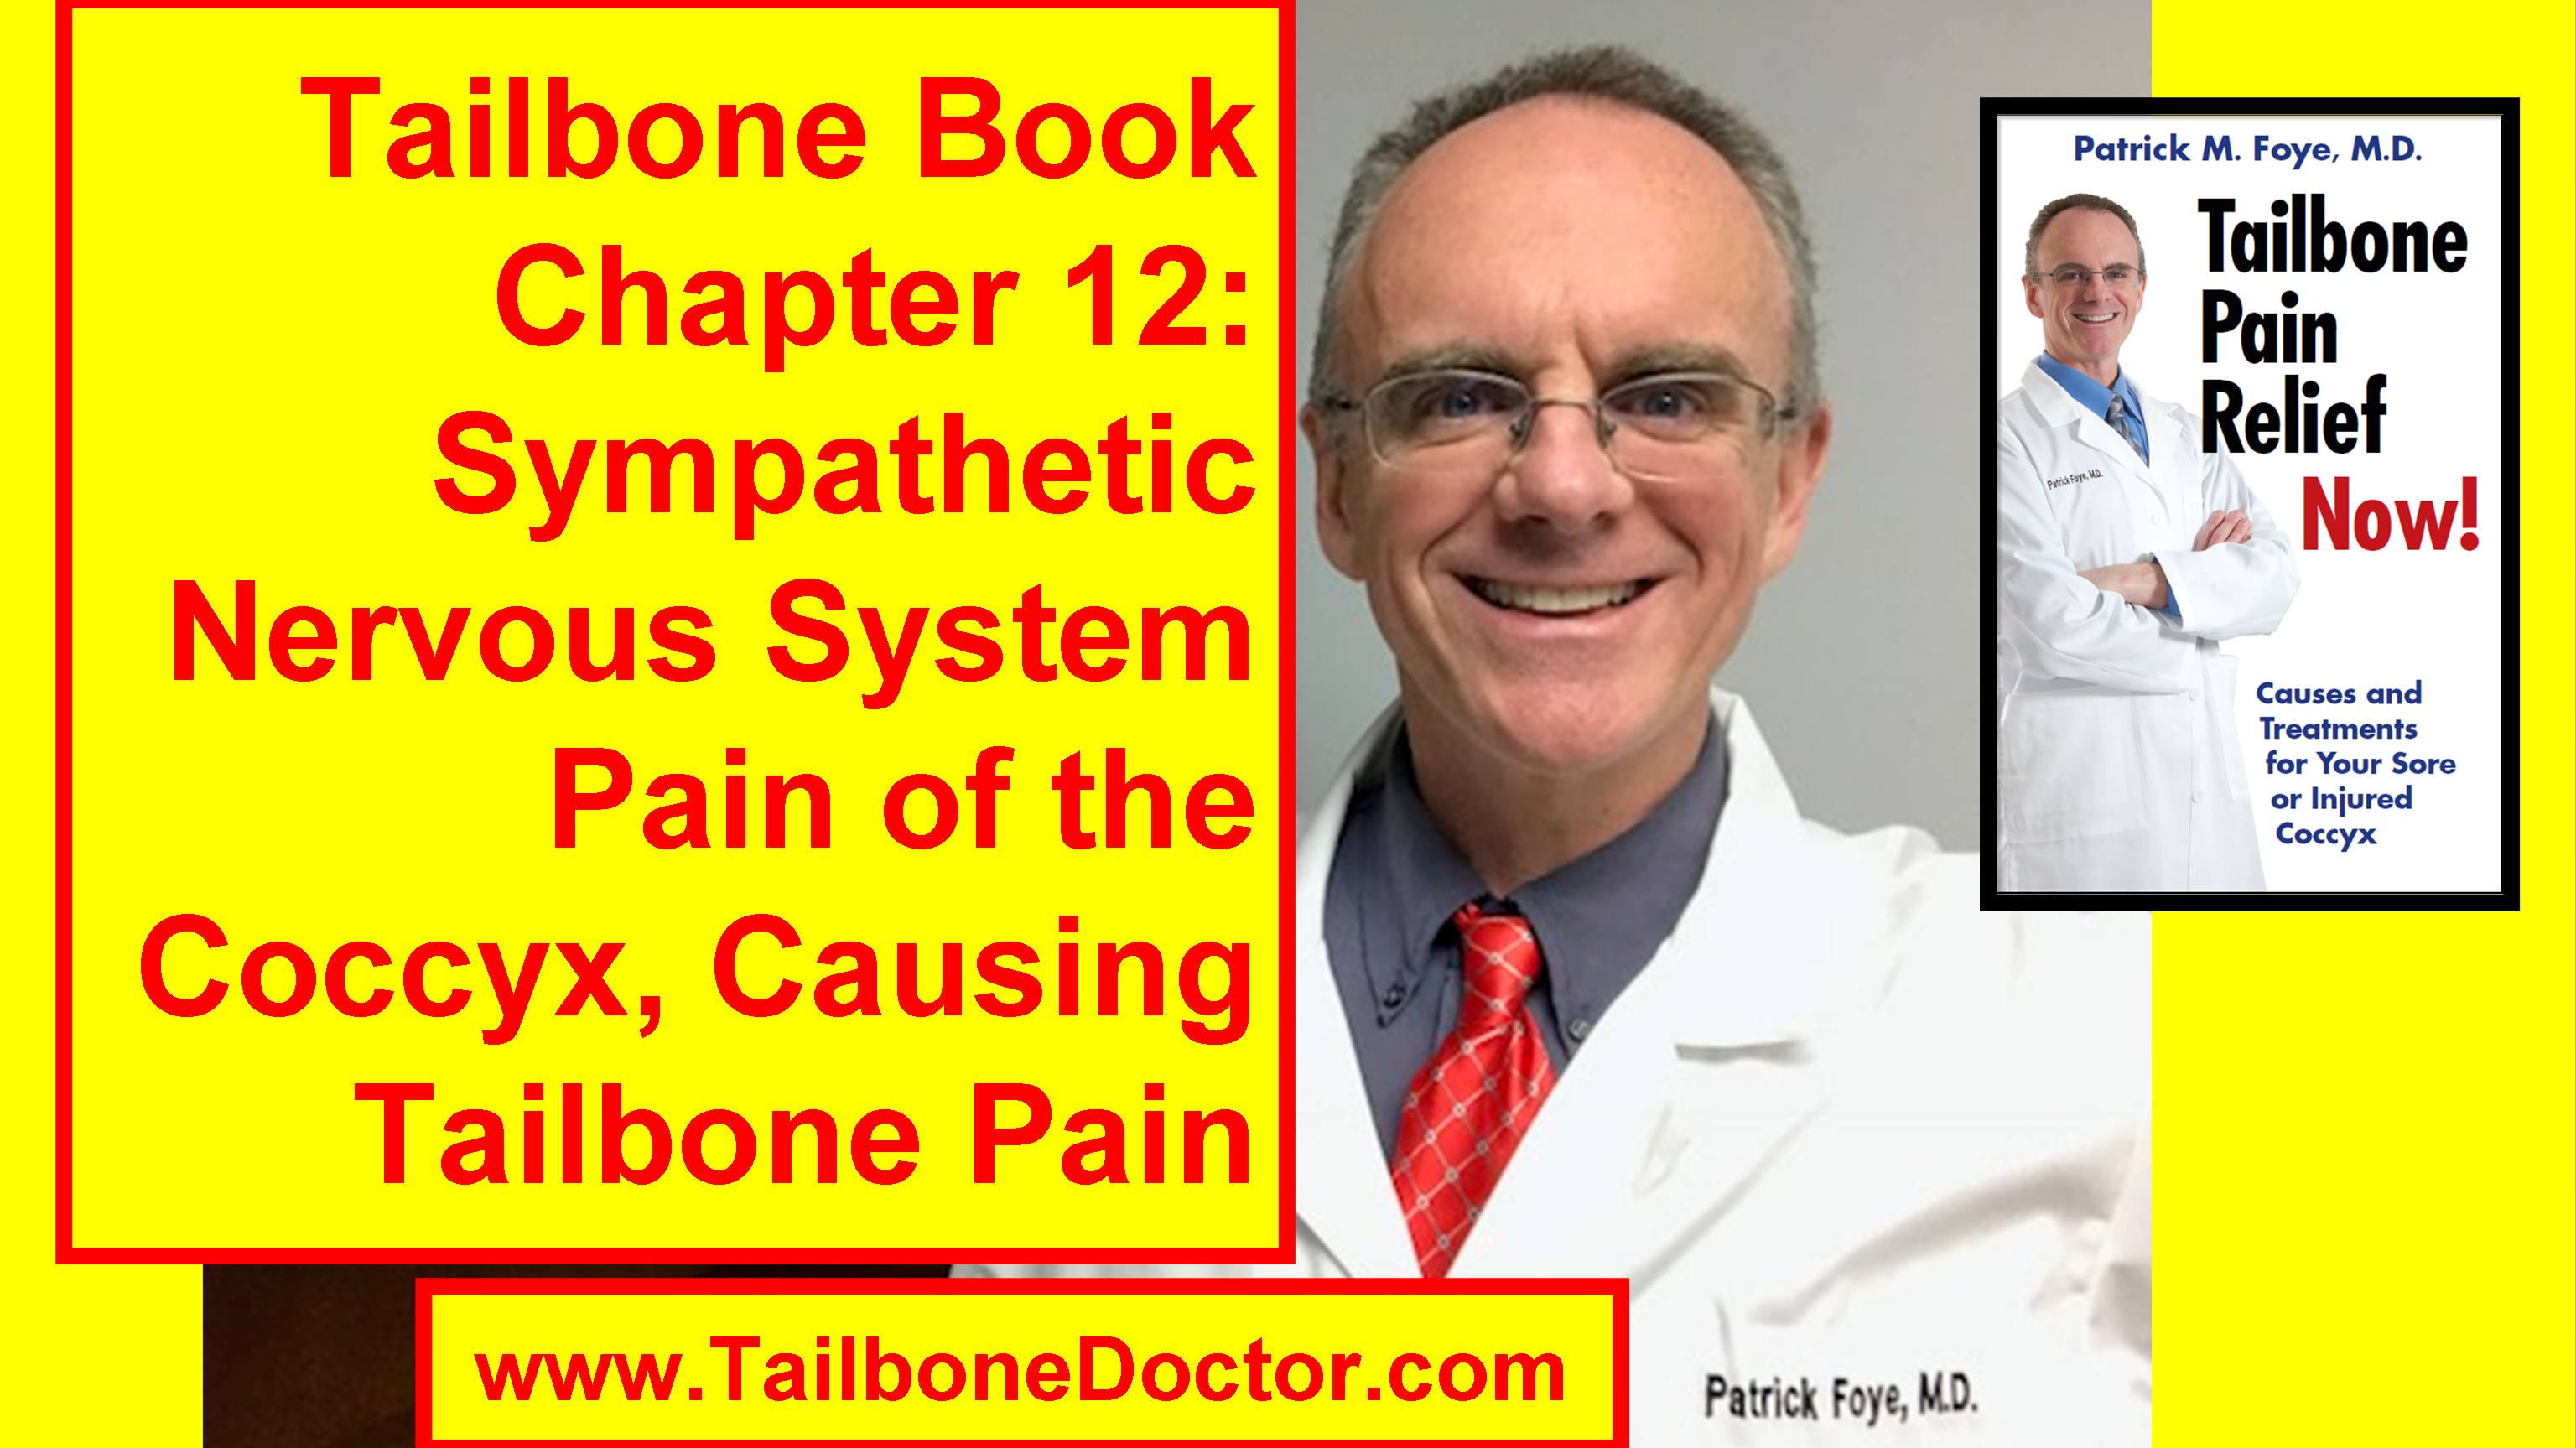 https://tailbonedoctor.com/wp-content/uploads/2018/03/Chapter-12-of-Tailbone-Pain-Book-Sympathetic-Nervous-System-Pain-of-the-Coccyx-Causing-Tailbone-Pain.jpg